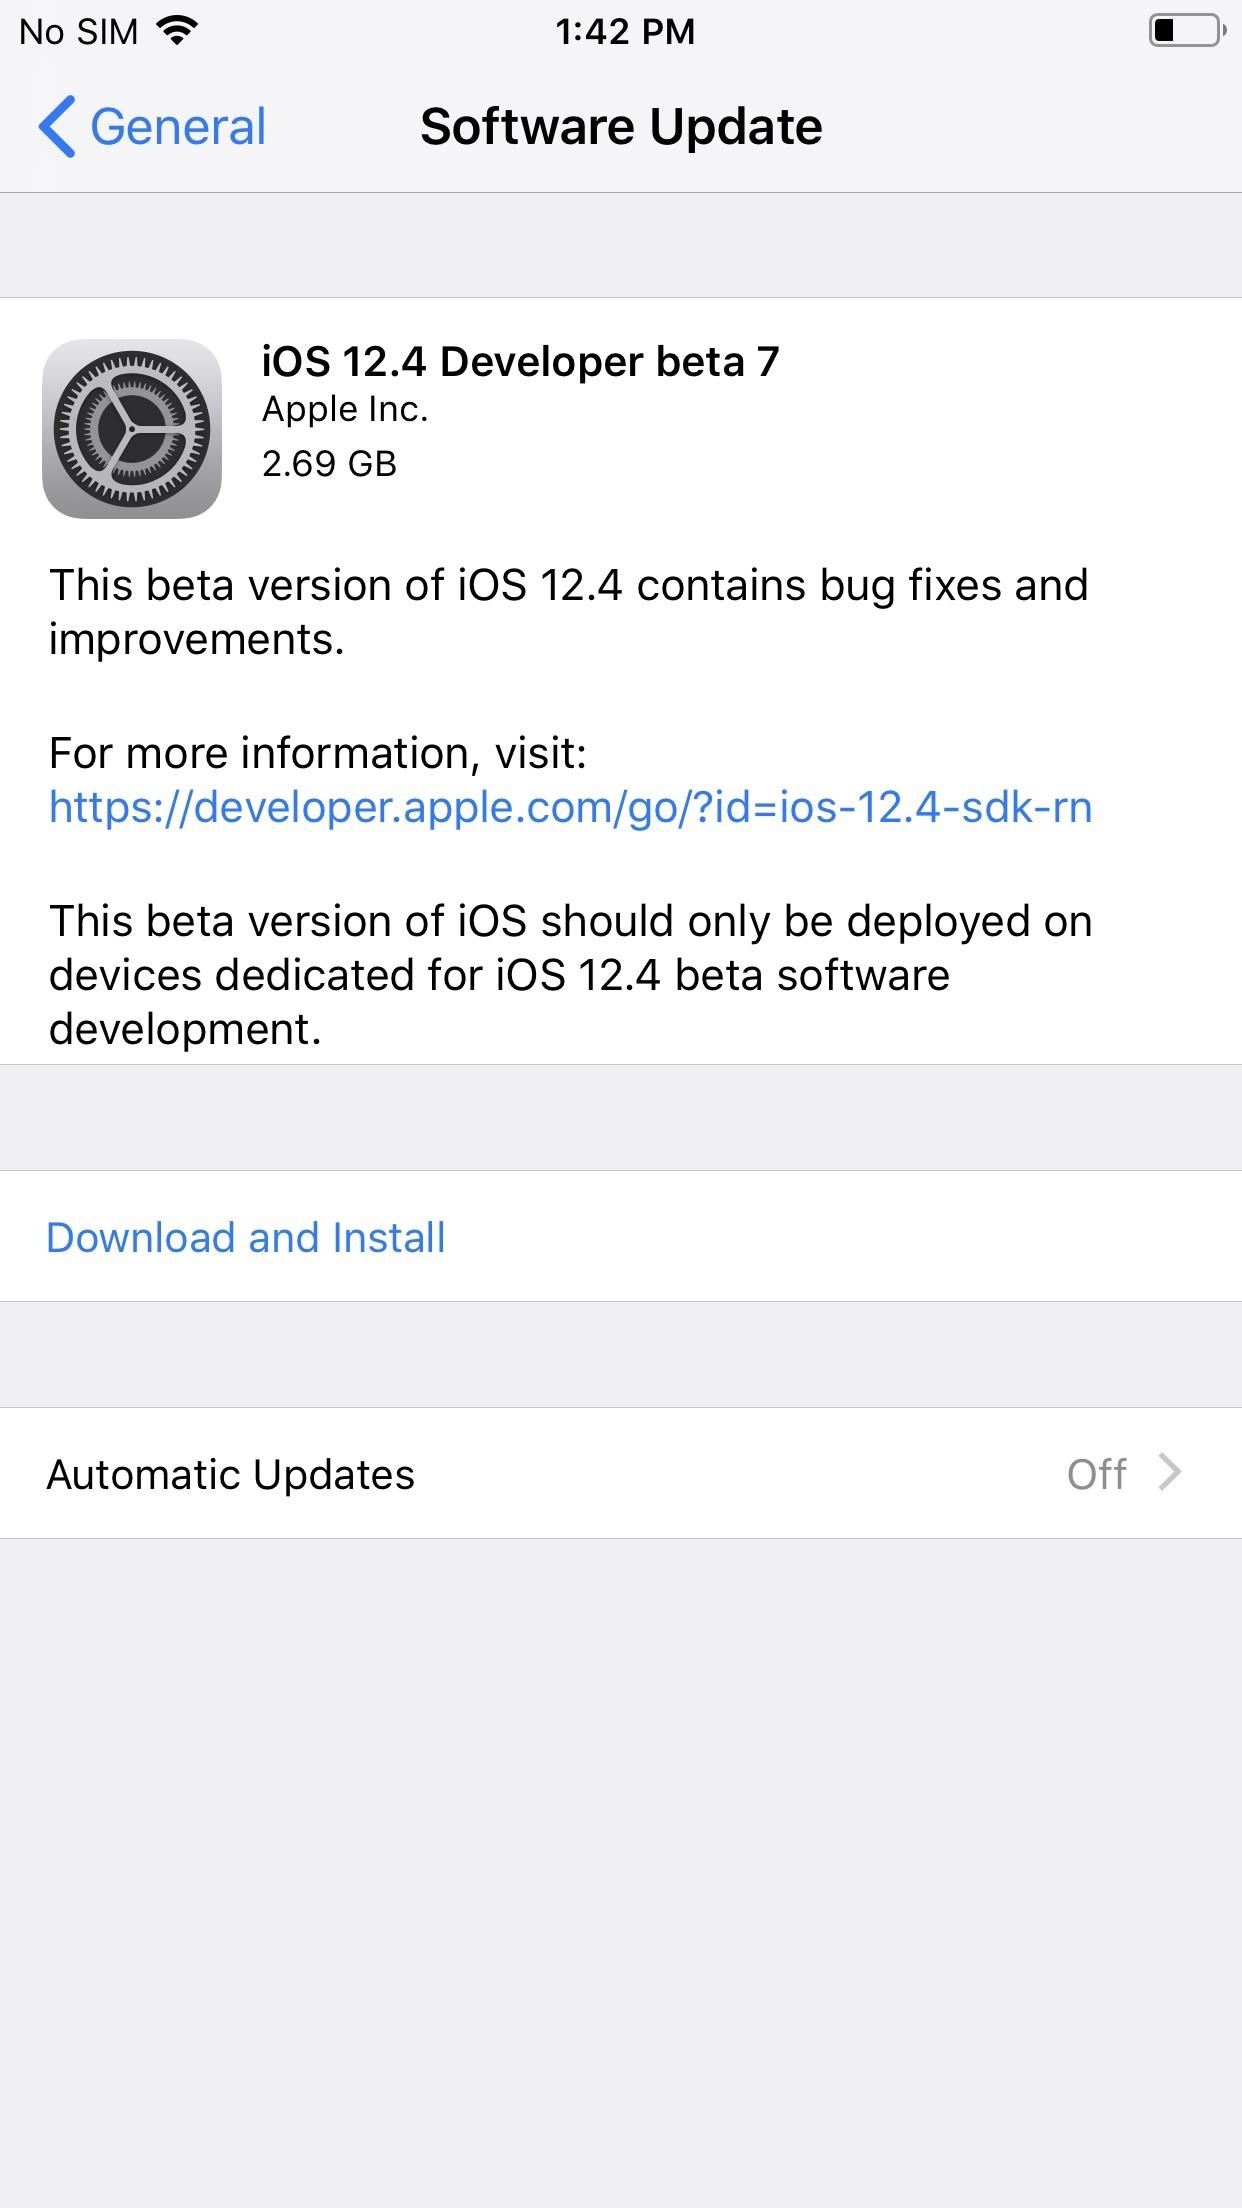 Apple Just Released iOS 12.4 Beta 7 for iPhone, Indicating Apple Card Is Near